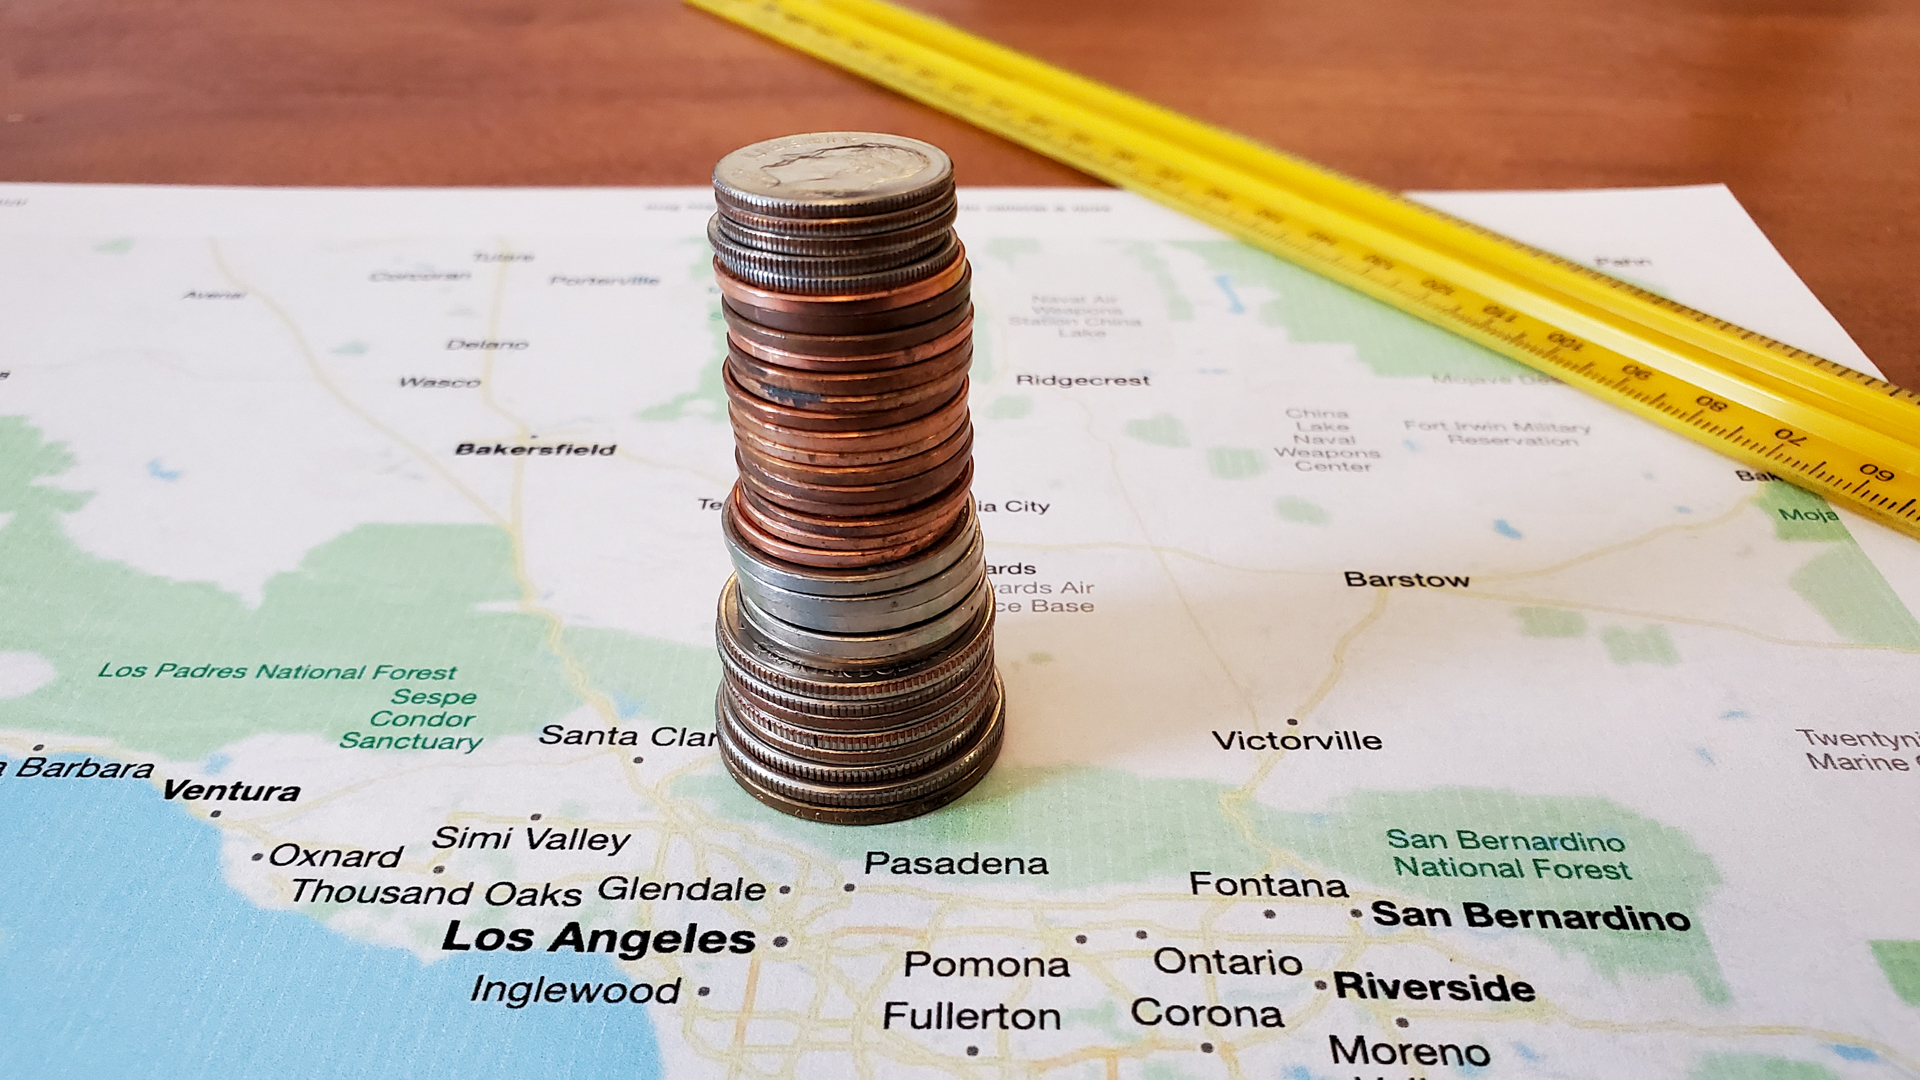 Coins stacked on a printed map of the Los Angeles area.